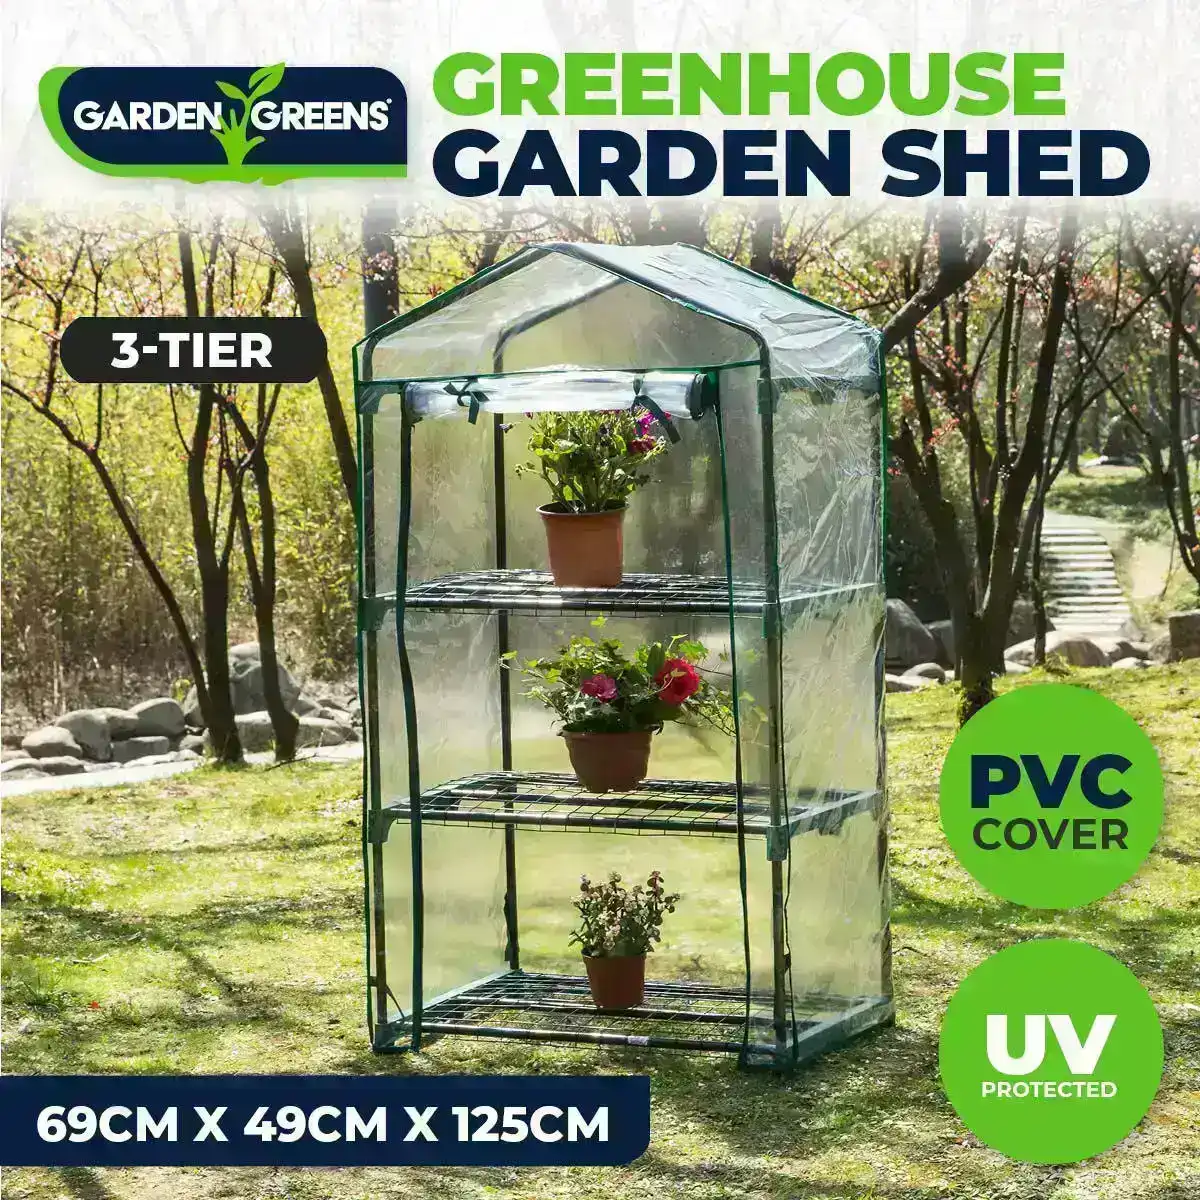 Garden Greens® Greenhouse Shed 3 Tier UV Protected Cover Solid Structure 1.25m